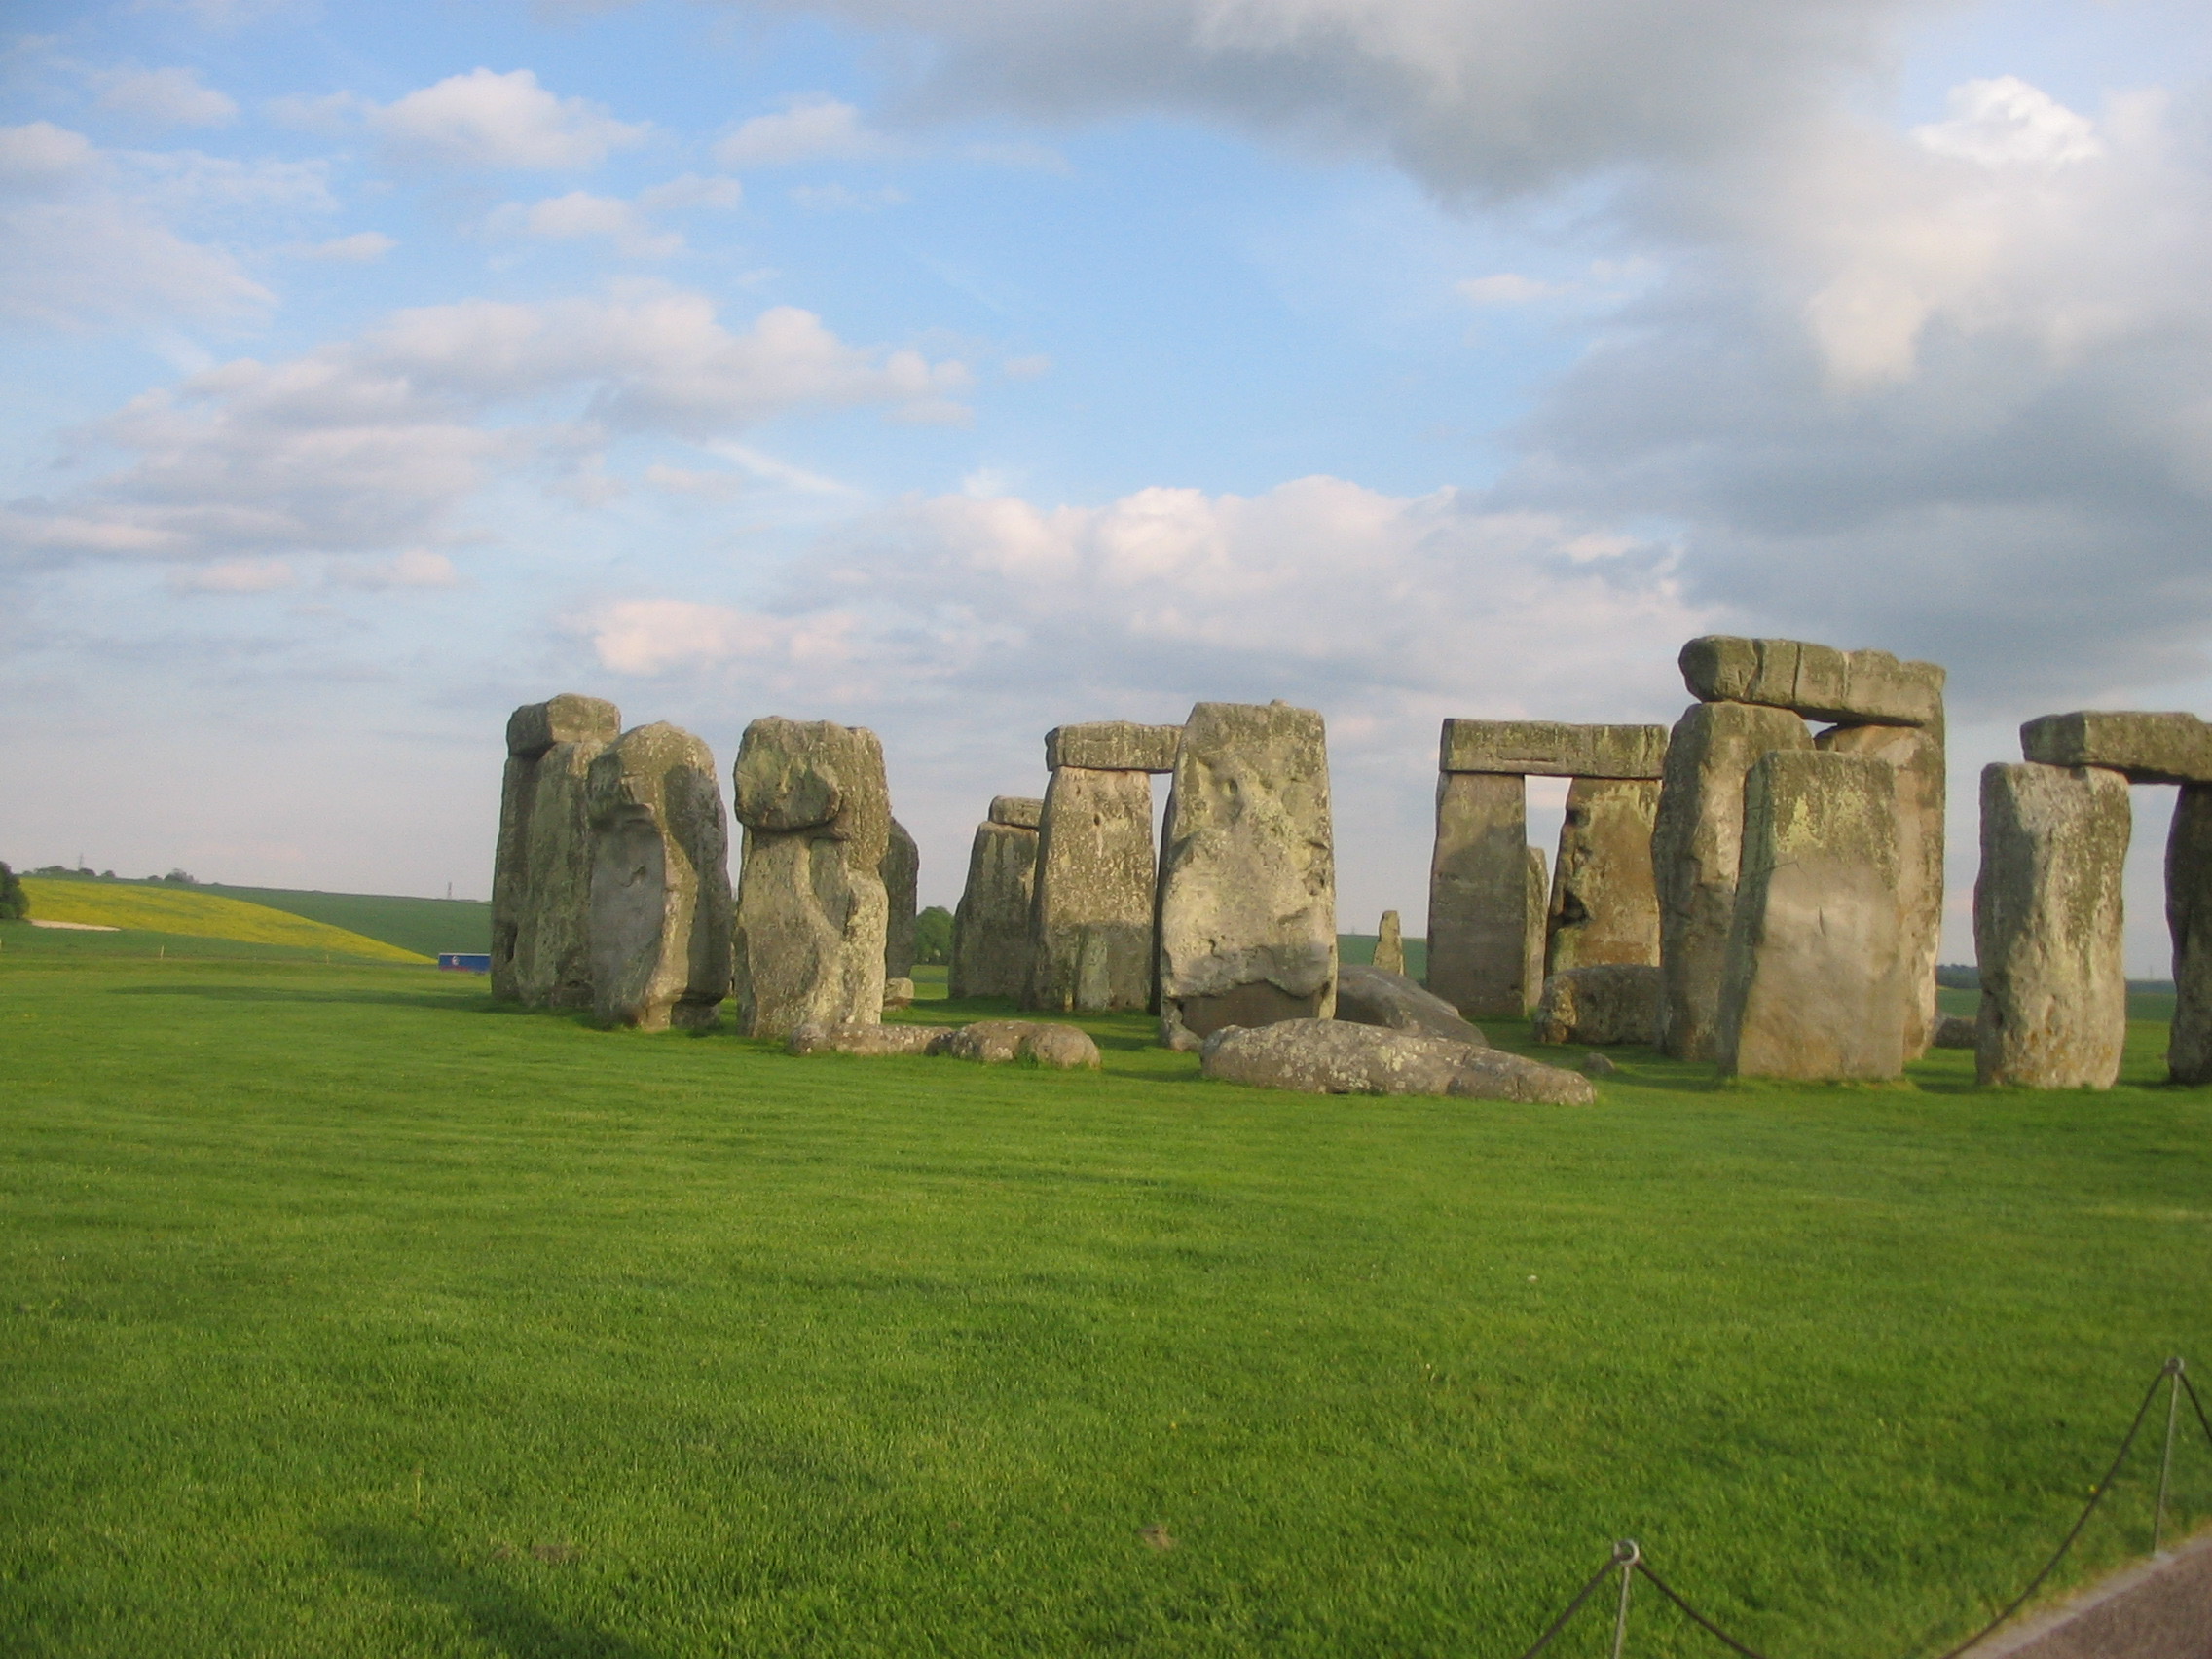 a stonehenge in a grassy field with Stonehenge in the background